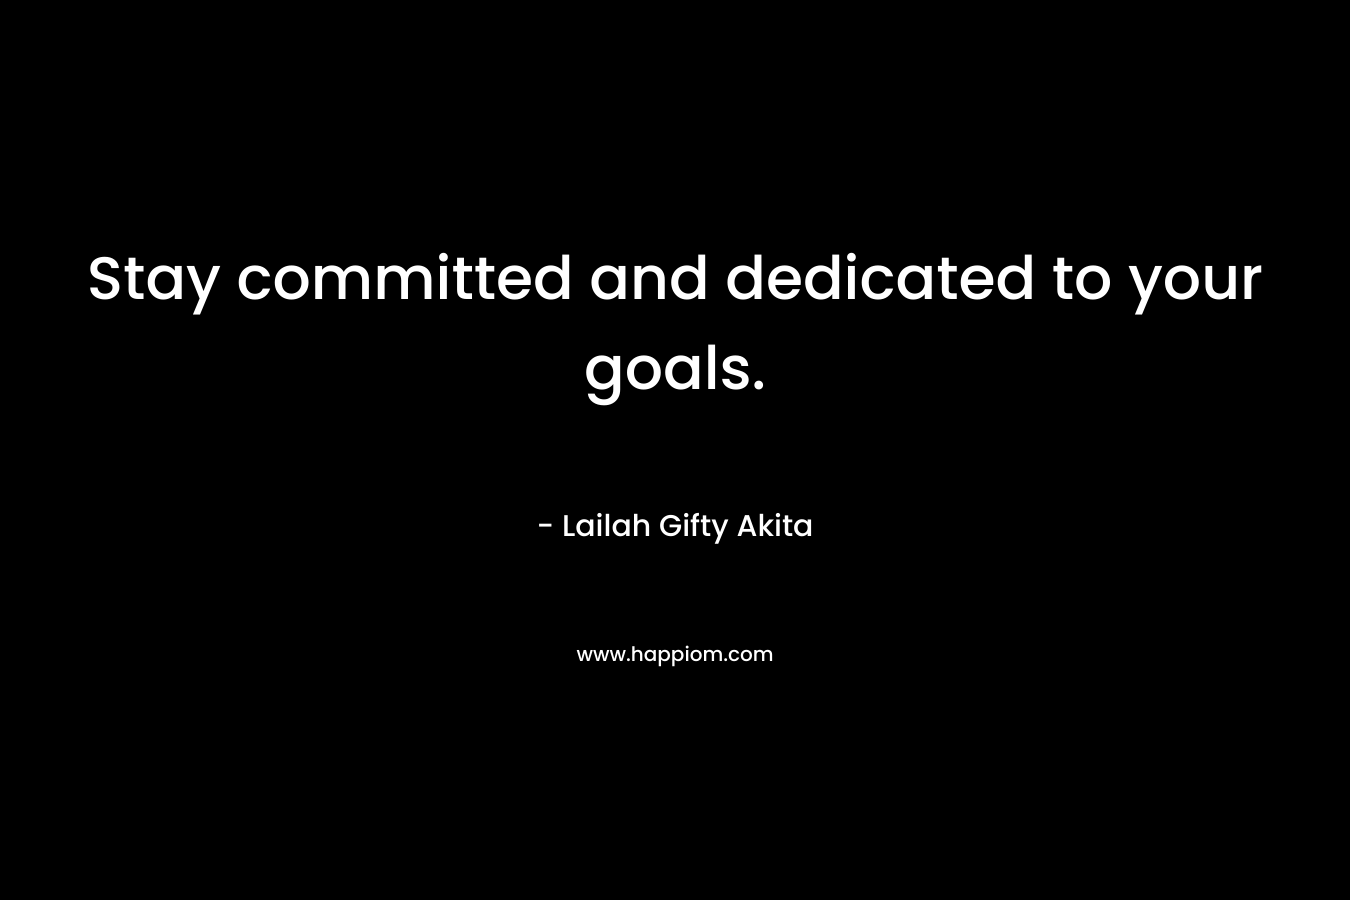 Stay committed and dedicated to your goals.